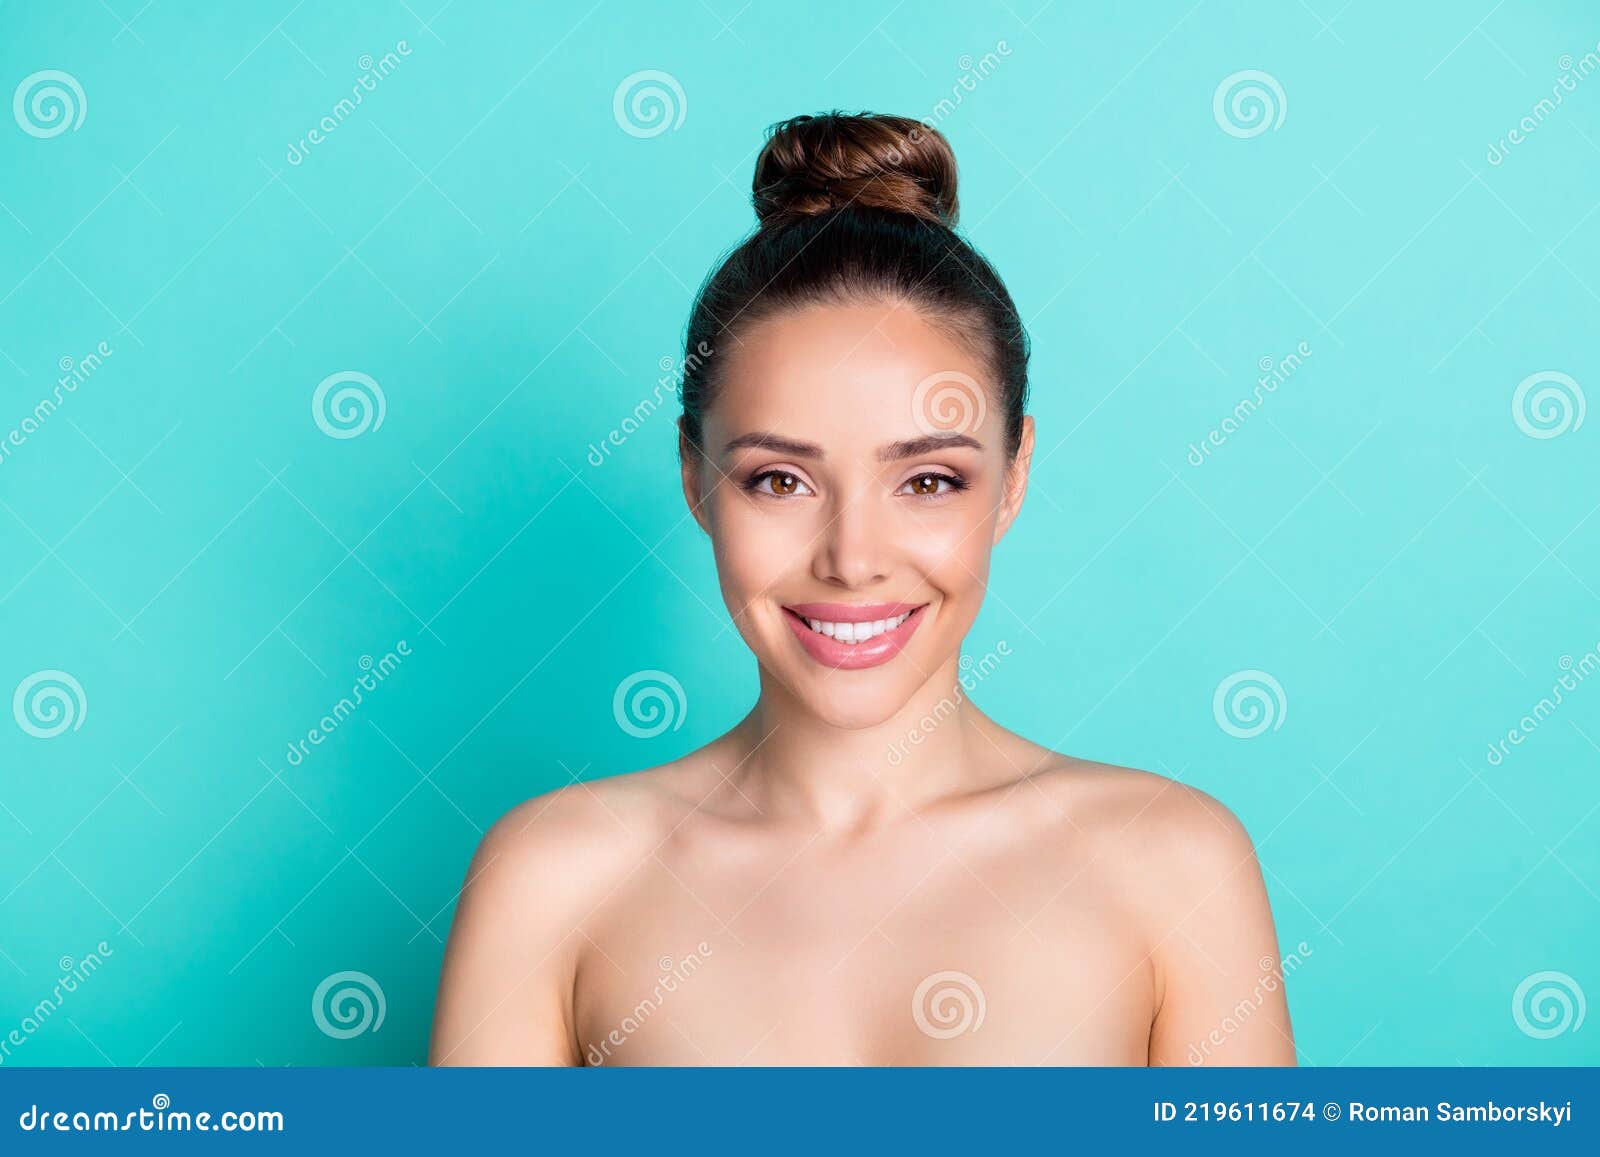 Photo of Young Happy Cheerful Beautiful Woman with No Clothes Natural  Beauty Isolated on Teal Color Background Stock Photo - Image of ideal,  hygiene: 219611674